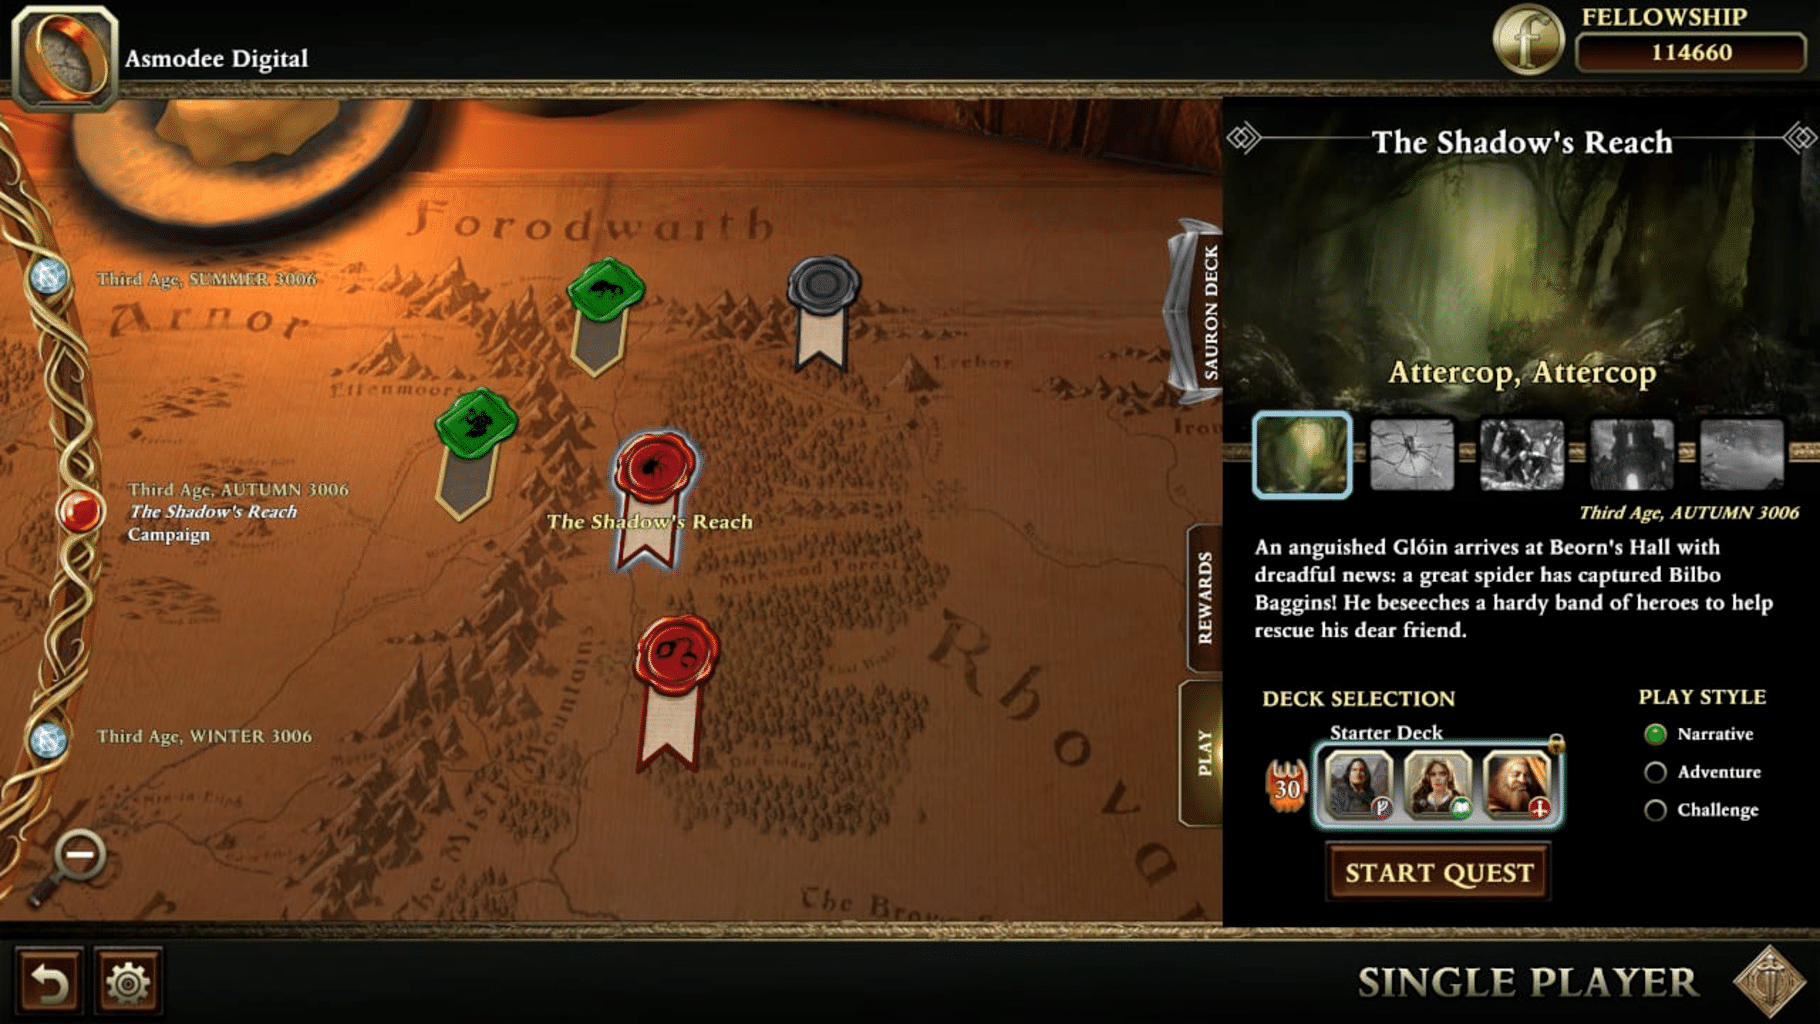 The Lord of the Rings: Adventure Card Game - Definitive Edition screenshot